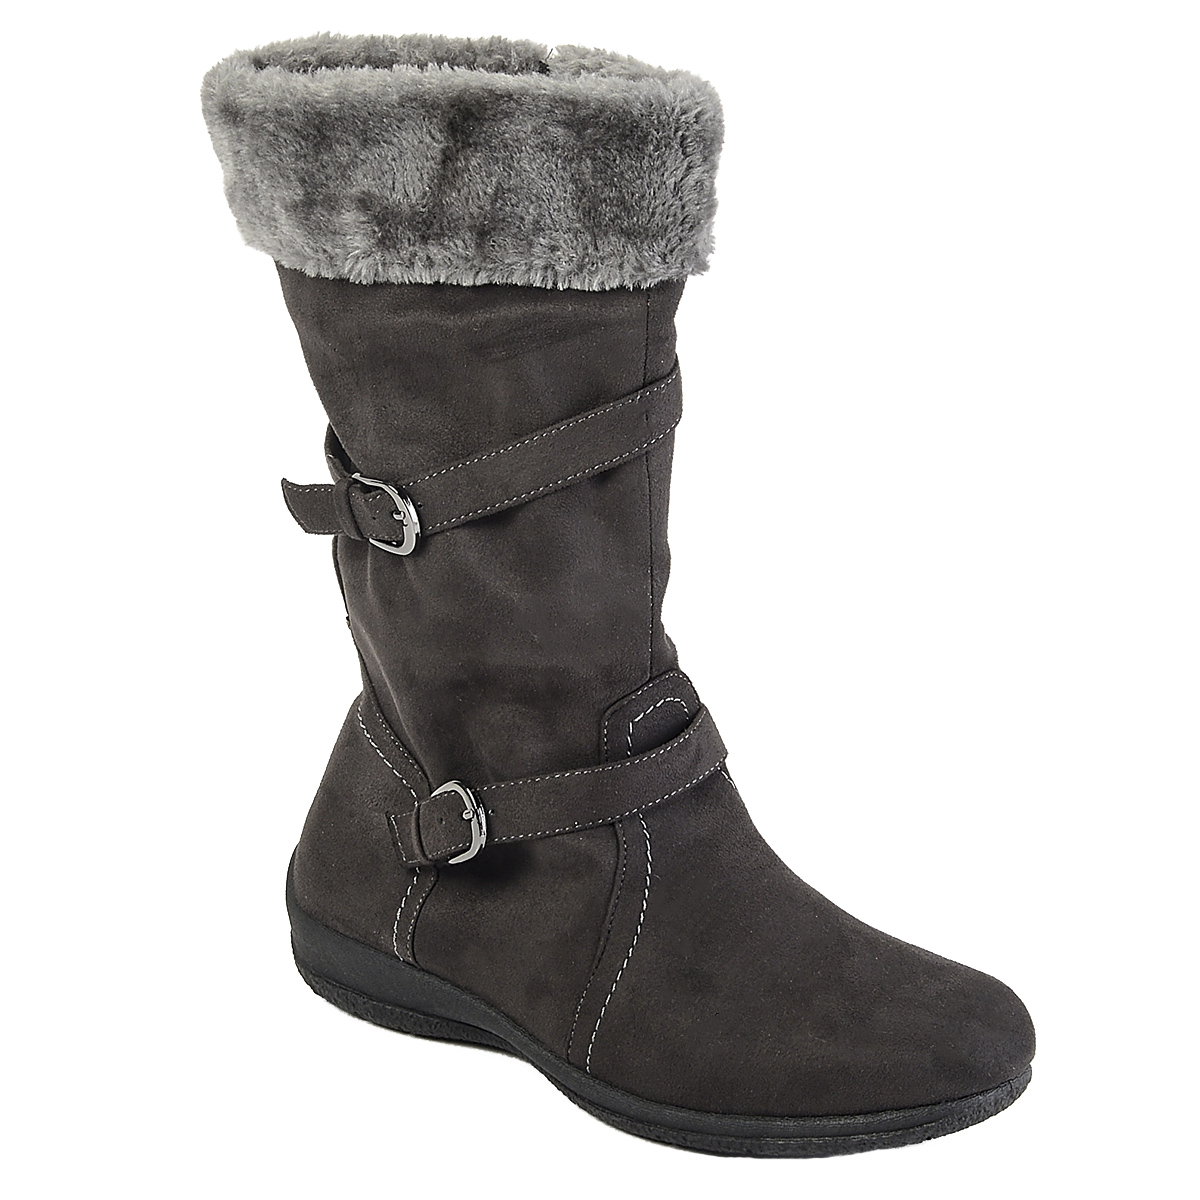 Womens Judith(tm) Isabelle 4 Mid Calf Boots